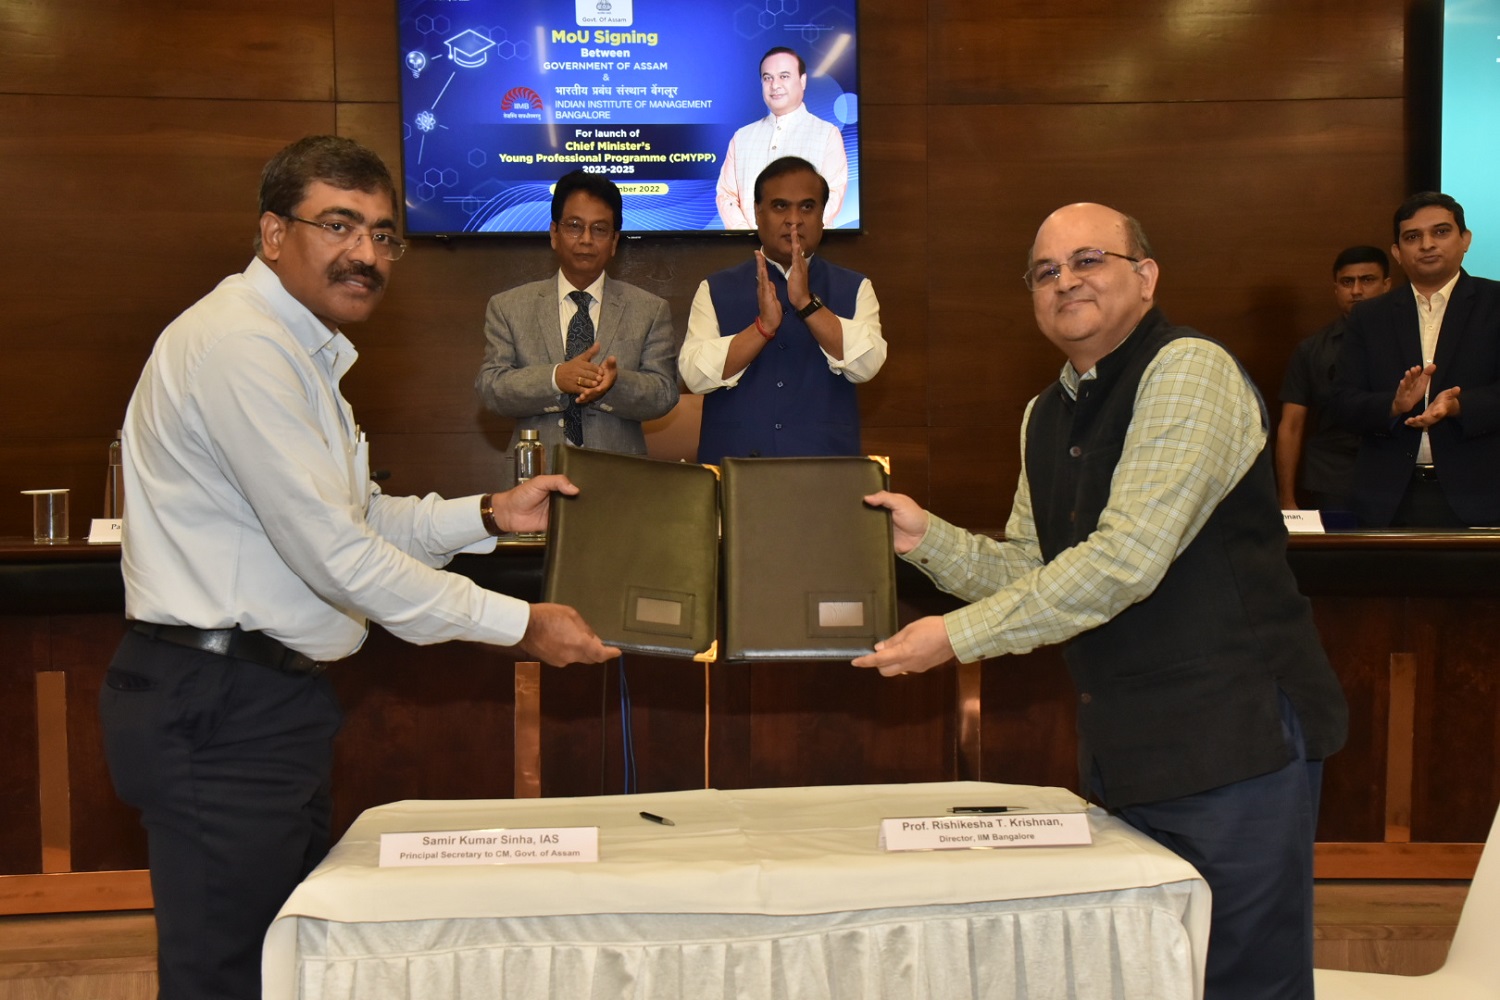 An MoU was signed at the Assam CM’s Office by Professor Rishikesha T Krishnan, Director, IIM Bangalore, and Mr. Samir Sinha, Principal Secretary, Chief Minister’s Office, Government of Assam, on November 14, 2022 to announce a training programme for young professionals.